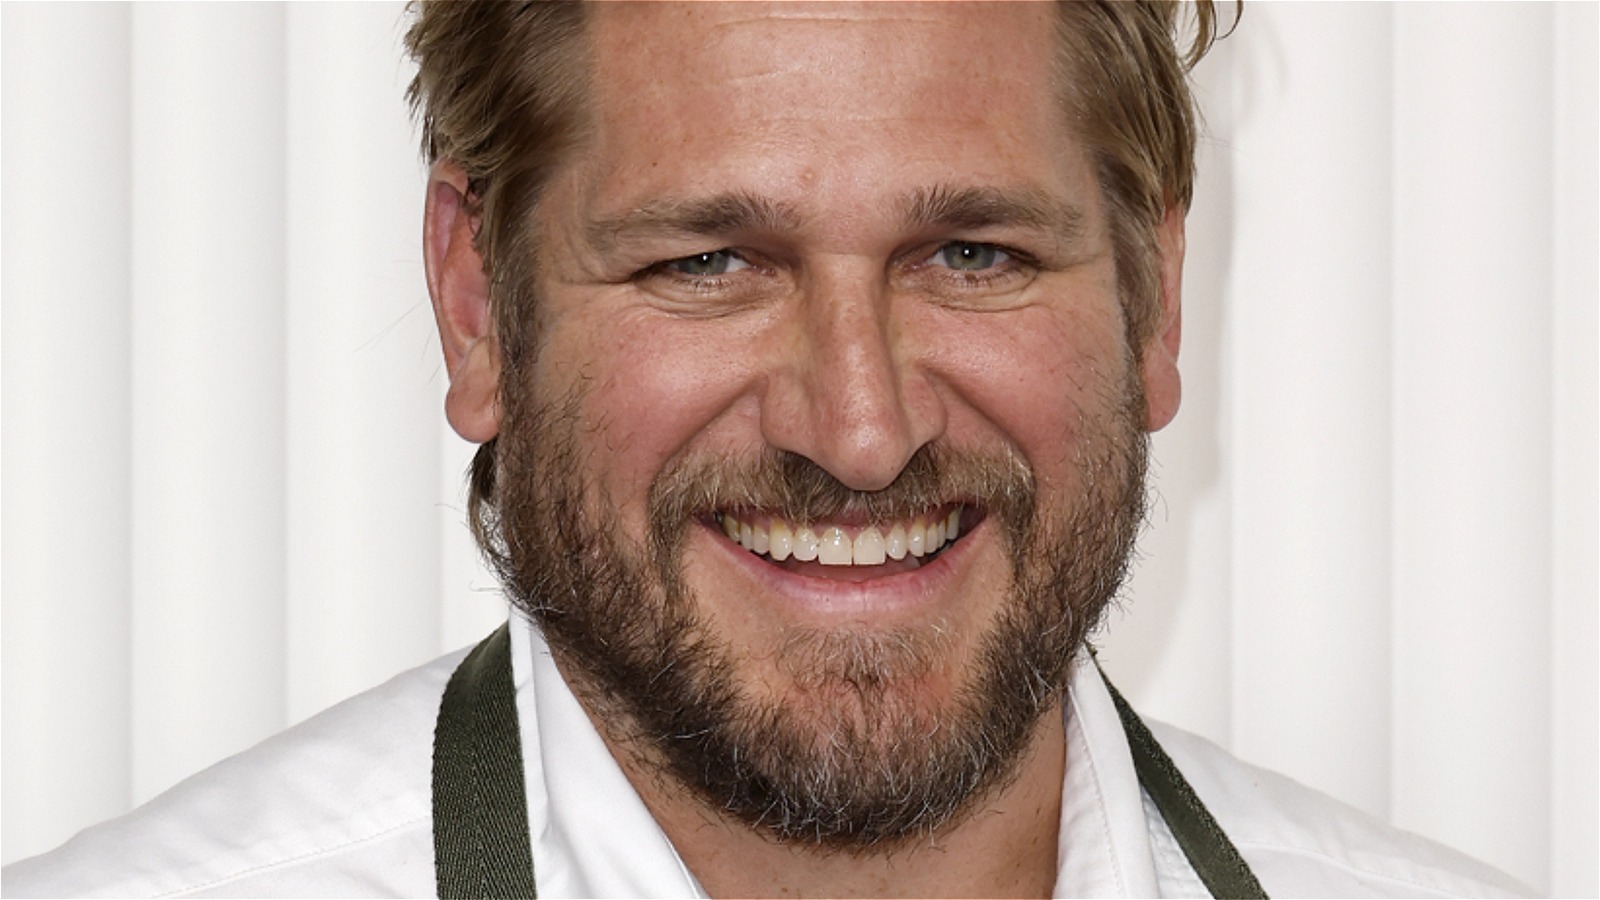 https://www.mashed.com/img/gallery/the-heartbreaking-last-meal-curtis-stone-and-his-wife-shared-before-the-pandemic-lockdown-exclusive/l-intro-1688052567.jpg